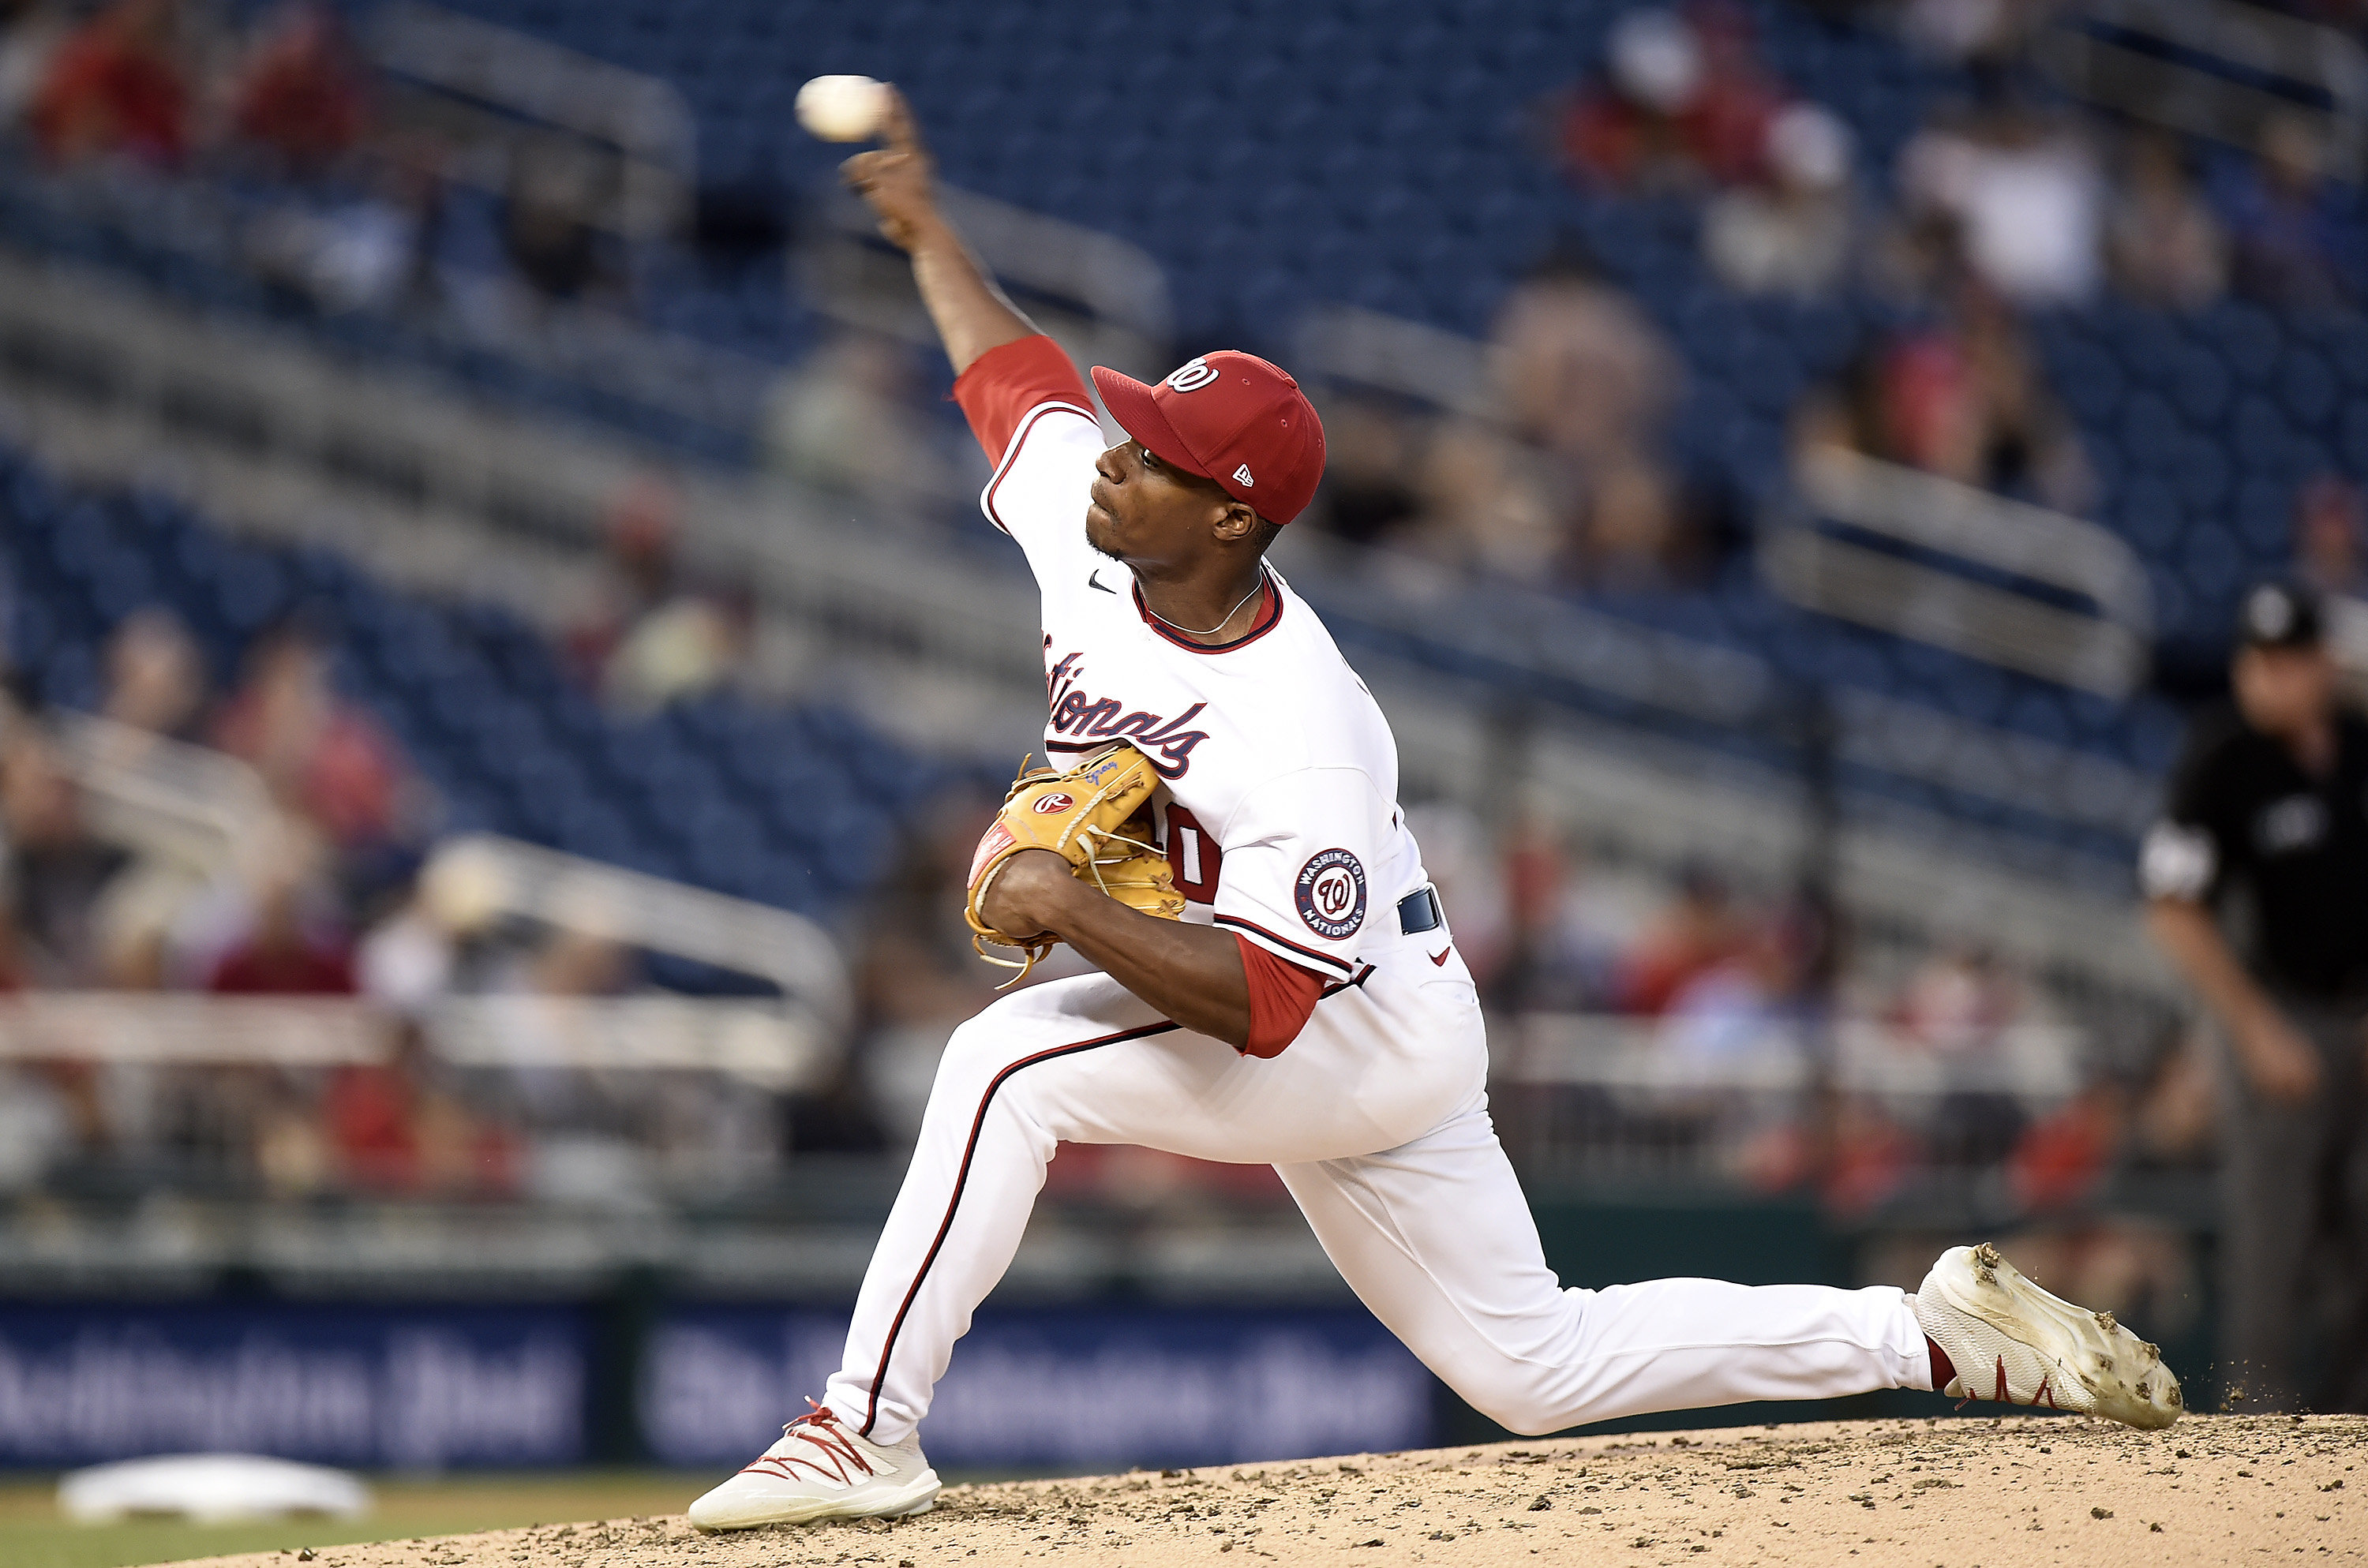 Josiah Gray of the Washington Nationals pitches in the fifth inning against the Philadelphia Phillies.